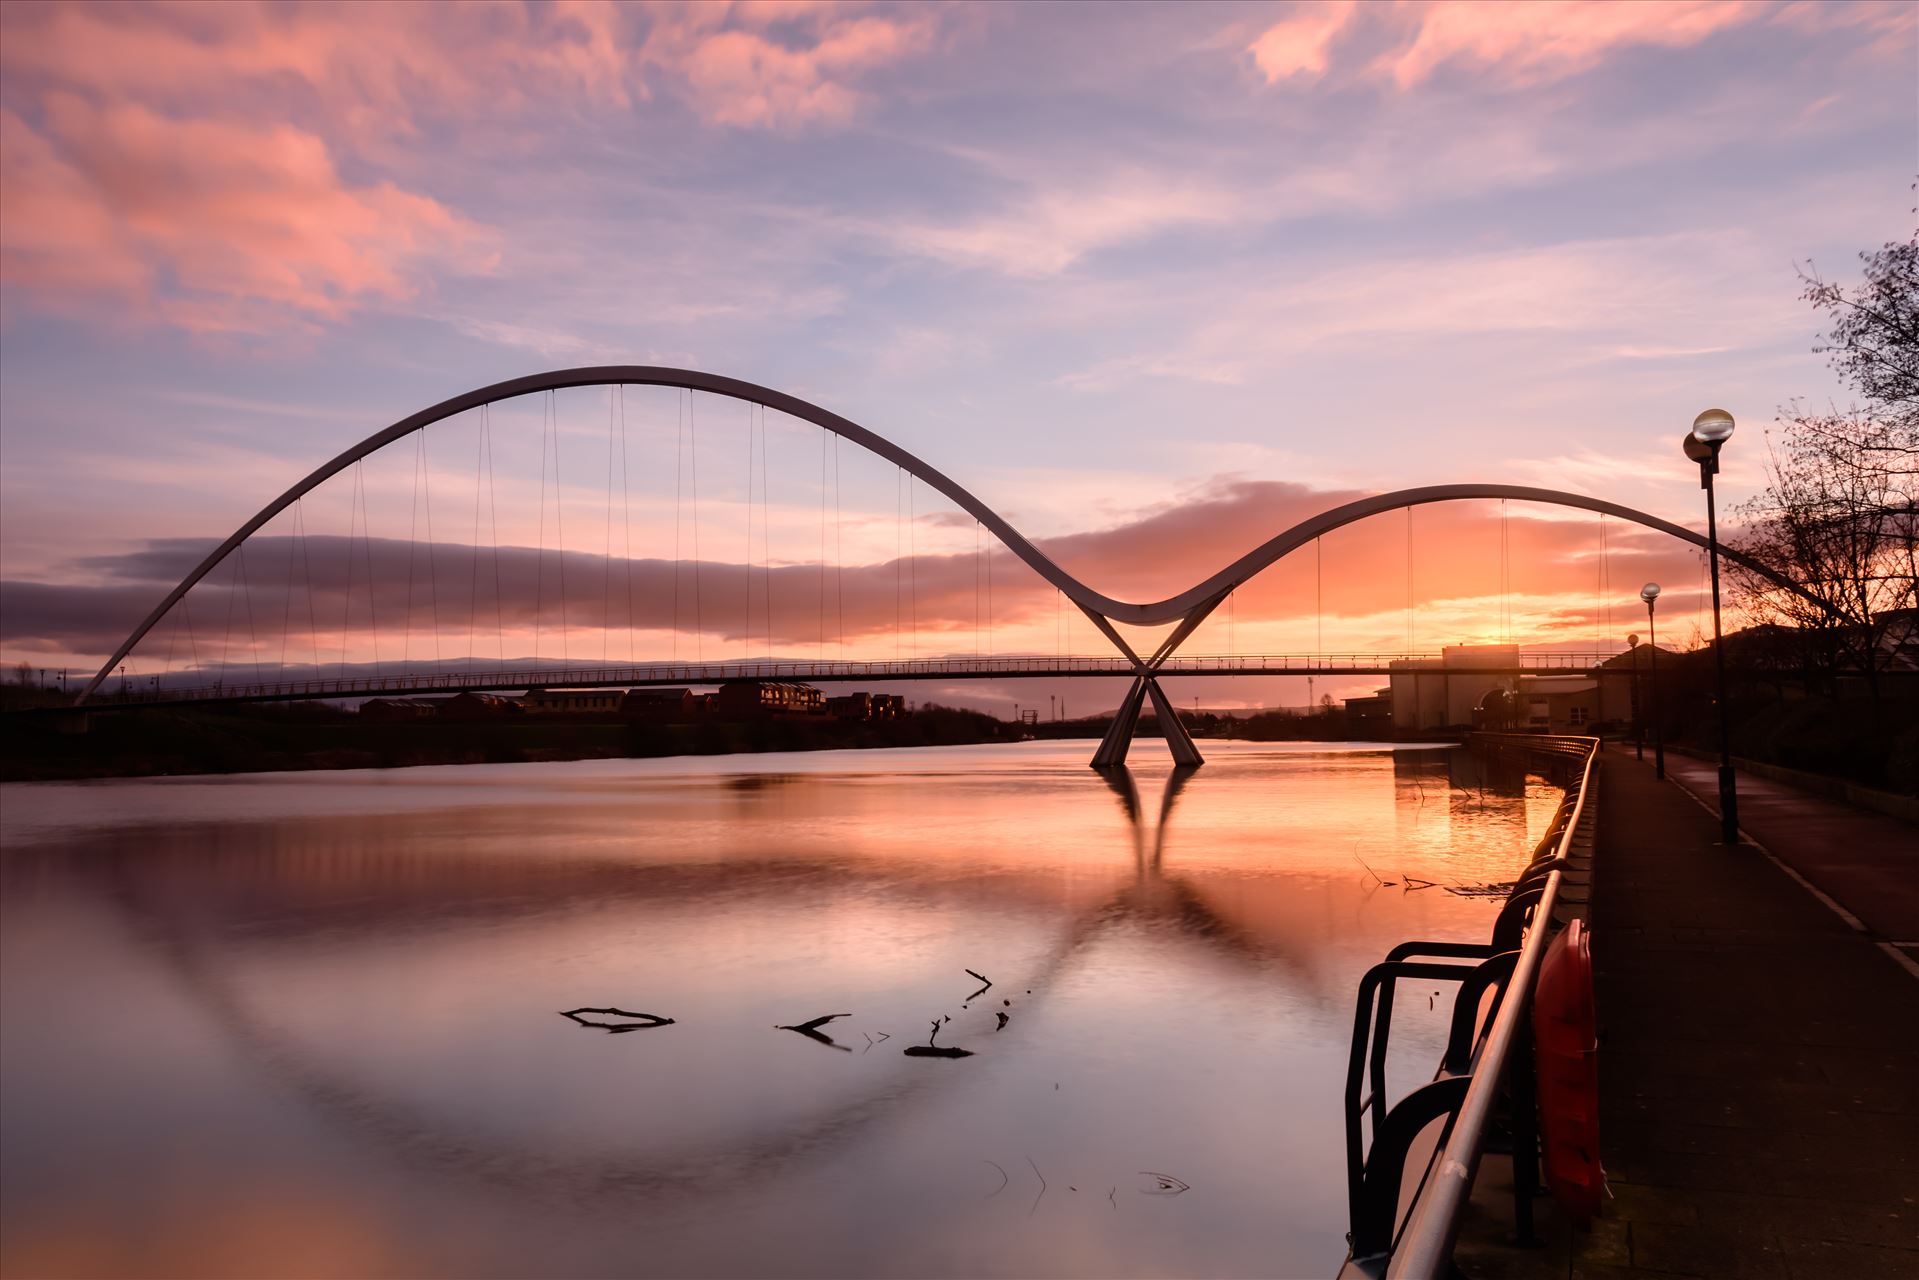 The Infinity Bridge 12 - The Infinity Bridge is a public pedestrian and cycle footbridge across the River Tees that was officially opened on 14 May 2009 at a cost of £15 million. by philreay